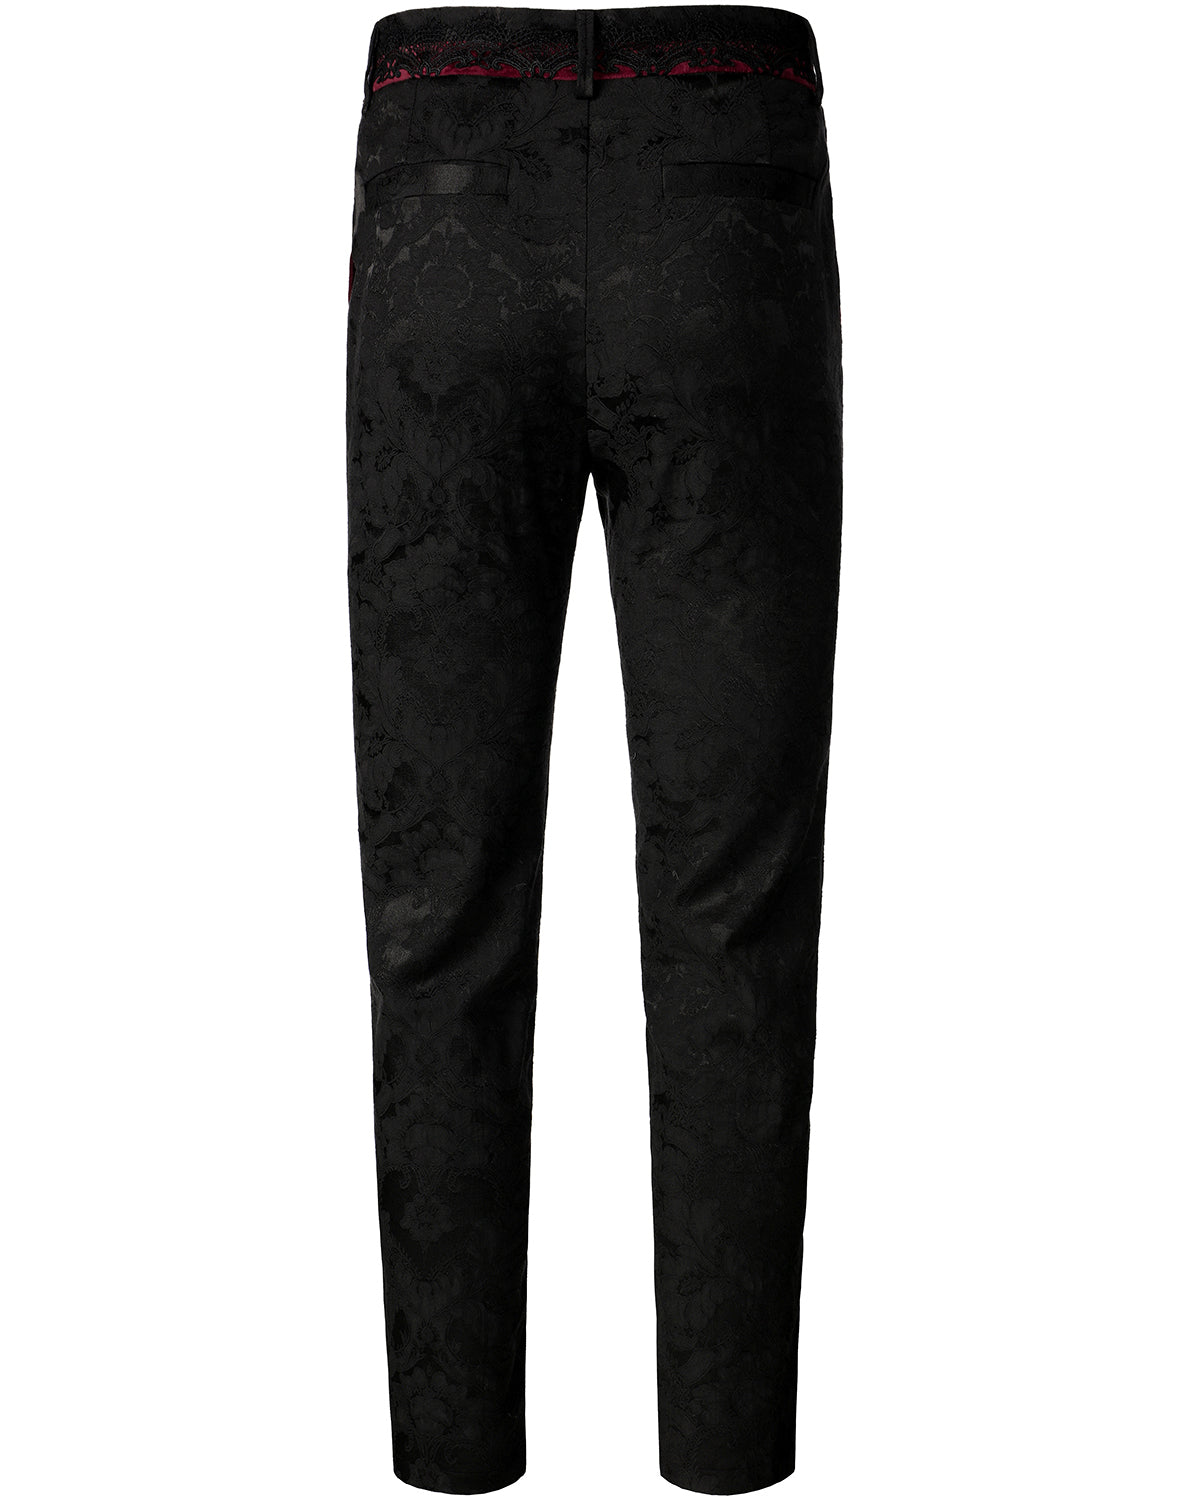 Men's Trousers Pants Black Brocade Steampunk VTG Vintage Gothic Victorian  (Small, Black Brocade) at  Men's Clothing store